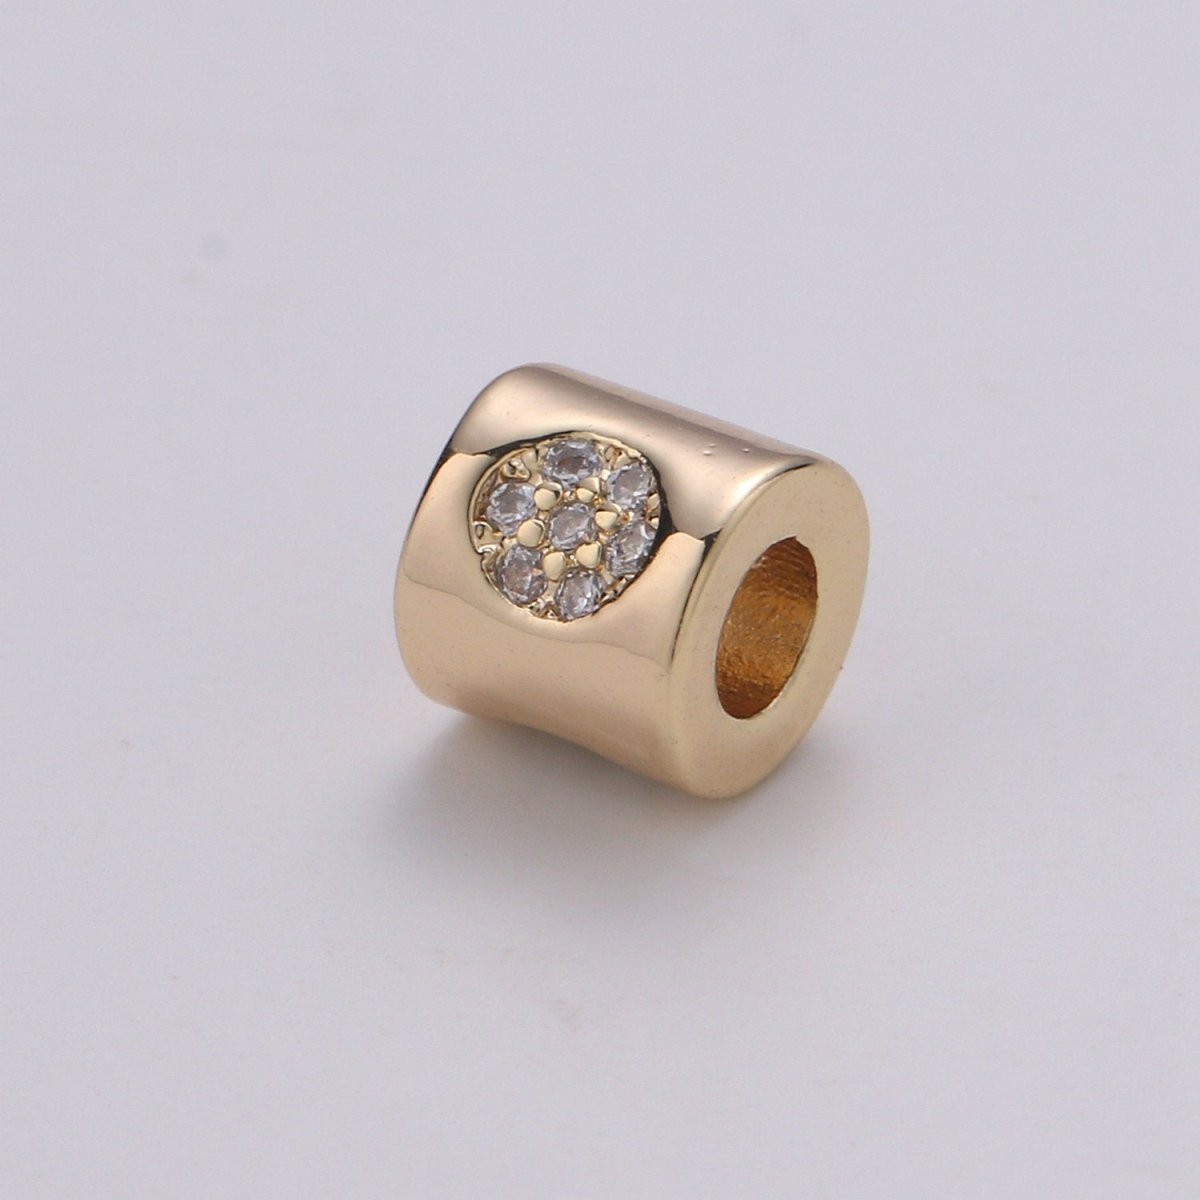 6mm Tiny Bead CZ Gold Beads Round Bead cylinder Cubic Beads for Bracelet Necklace Supply Large Hole Beads 3mm hole - DLUXCA